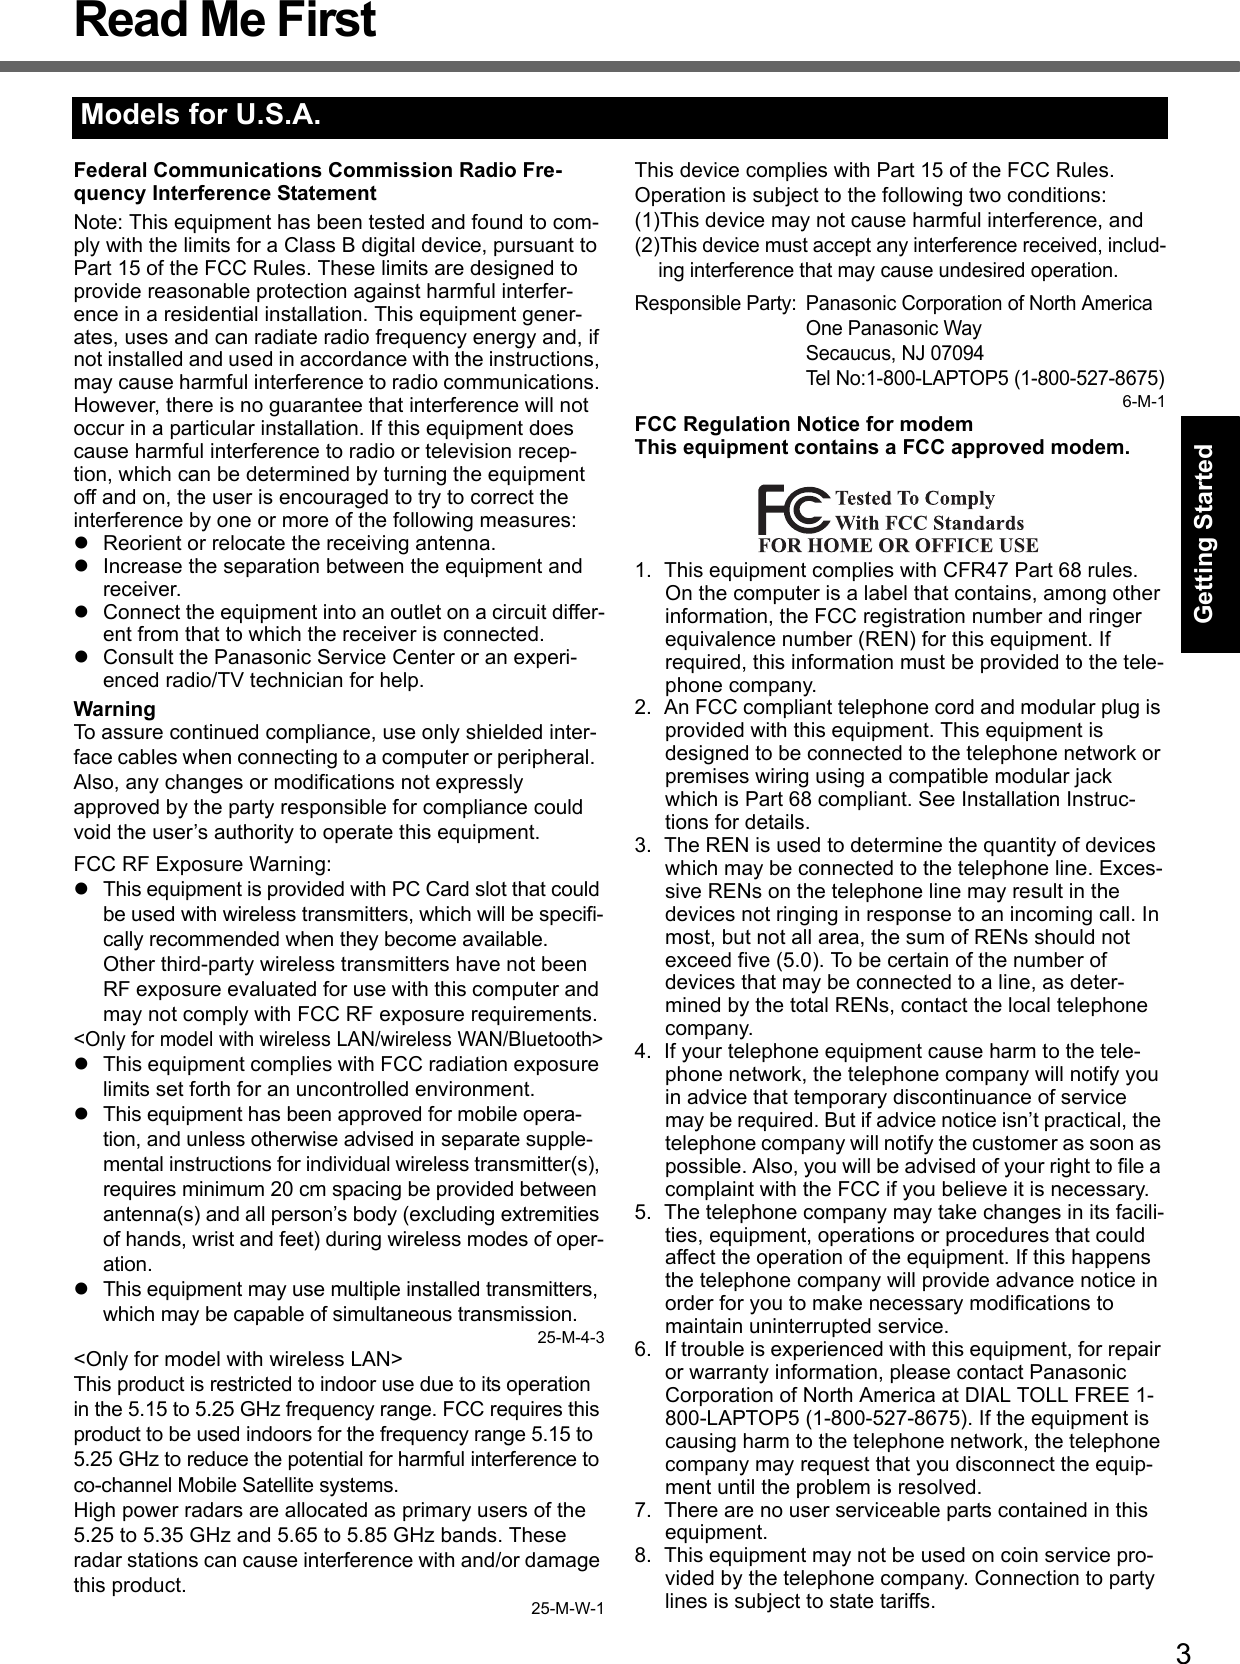 3Getting StartedUseful InformationTroubleshootingAppendixRead Me FirstFederal Communications Commission Radio Fre-quency Interference StatementNote: This equipment has been tested and found to com-ply with the limits for a Class B digital device, pursuant to Part 15 of the FCC Rules. These limits are designed to provide reasonable protection against harmful interfer-ence in a residential installation. This equipment gener-ates, uses and can radiate radio frequency energy and, if not installed and used in accordance with the instructions, may cause harmful interference to radio communications. However, there is no guarantee that interference will not occur in a particular installation. If this equipment does cause harmful interference to radio or television recep-tion, which can be determined by turning the equipment off and on, the user is encouraged to try to correct the interference by one or more of the following measures:Reorient or relocate the receiving antenna.Increase the separation between the equipment and receiver.Connect the equipment into an outlet on a circuit differ-ent from that to which the receiver is connected.Consult the Panasonic Service Center or an experi-enced radio/TV technician for help.WarningTo assure continued compliance, use only shielded inter-face cables when connecting to a computer or peripheral.  Also, any changes or modifications not expressly approved by the party responsible for compliance could void the user’s authority to operate this equipment.FCC RF Exposure Warning:This equipment is provided with PC Card slot that could be used with wireless transmitters, which will be specifi-cally recommended when they become available.Other third-party wireless transmitters have not been RF exposure evaluated for use with this computer and may not comply with FCC RF exposure requirements.&lt;Only for model with wireless LAN/wireless WAN/Bluetooth&gt;This equipment complies with FCC radiation exposure limits set forth for an uncontrolled environment.This equipment has been approved for mobile opera-tion, and unless otherwise advised in separate supple-mental instructions for individual wireless transmitter(s), requires minimum 20 cm spacing be provided between antenna(s) and all person’s body (excluding extremities of hands, wrist and feet) during wireless modes of oper-ation.This equipment may use multiple installed transmitters, which may be capable of simultaneous transmission.25-M-4-3&lt;Only for model with wireless LAN&gt;This product is restricted to indoor use due to its operation in the 5.15 to 5.25 GHz frequency range. FCC requires this product to be used indoors for the frequency range 5.15 to 5.25 GHz to reduce the potential for harmful interference to co-channel Mobile Satellite systems.High power radars are allocated as primary users of the 5.25 to 5.35 GHz and 5.65 to 5.85 GHz bands. These radar stations can cause interference with and/or damage this product.25-M-W-1This device complies with Part 15 of the FCC Rules.  Operation is subject to the following two conditions:(1)This device may not cause harmful interference, and(2)This device must accept any interference received, includ-ing interference that may cause undesired operation.Responsible Party: Panasonic Corporation of North AmericaOne Panasonic WaySecaucus, NJ 07094Tel No:1-800-LAPTOP5 (1-800-527-8675)6-M-1FCC Regulation Notice for modemThis equipment contains a FCC approved modem.1. This equipment complies with CFR47 Part 68 rules. On the computer is a label that contains, among other information, the FCC registration number and ringer equivalence number (REN) for this equipment. If required, this information must be provided to the tele-phone company.2. An FCC compliant telephone cord and modular plug is provided with this equipment. This equipment is designed to be connected to the telephone network or premises wiring using a compatible modular jack which is Part 68 compliant. See Installation Instruc-tions for details.3. The REN is used to determine the quantity of devices which may be connected to the telephone line. Exces-sive RENs on the telephone line may result in the devices not ringing in response to an incoming call. In most, but not all area, the sum of RENs should not exceed five (5.0). To be certain of the number of devices that may be connected to a line, as deter-mined by the total RENs, contact the local telephone company.4. If your telephone equipment cause harm to the tele-phone network, the telephone company will notify you in advice that temporary discontinuance of service may be required. But if advice notice isn’t practical, the telephone company will notify the customer as soon as possible. Also, you will be advised of your right to file a complaint with the FCC if you believe it is necessary.5. The telephone company may take changes in its facili-ties, equipment, operations or procedures that could affect the operation of the equipment. If this happens the telephone company will provide advance notice in order for you to make necessary modifications to maintain uninterrupted service.6. If trouble is experienced with this equipment, for repair or warranty information, please contact Panasonic Corporation of North America at DIAL TOLL FREE 1-800-LAPTOP5 (1-800-527-8675). If the equipment is causing harm to the telephone network, the telephone company may request that you disconnect the equip-ment until the problem is resolved.7. There are no user serviceable parts contained in this equipment.8. This equipment may not be used on coin service pro-vided by the telephone company. Connection to party lines is subject to state tariffs.Models for U.S.A.